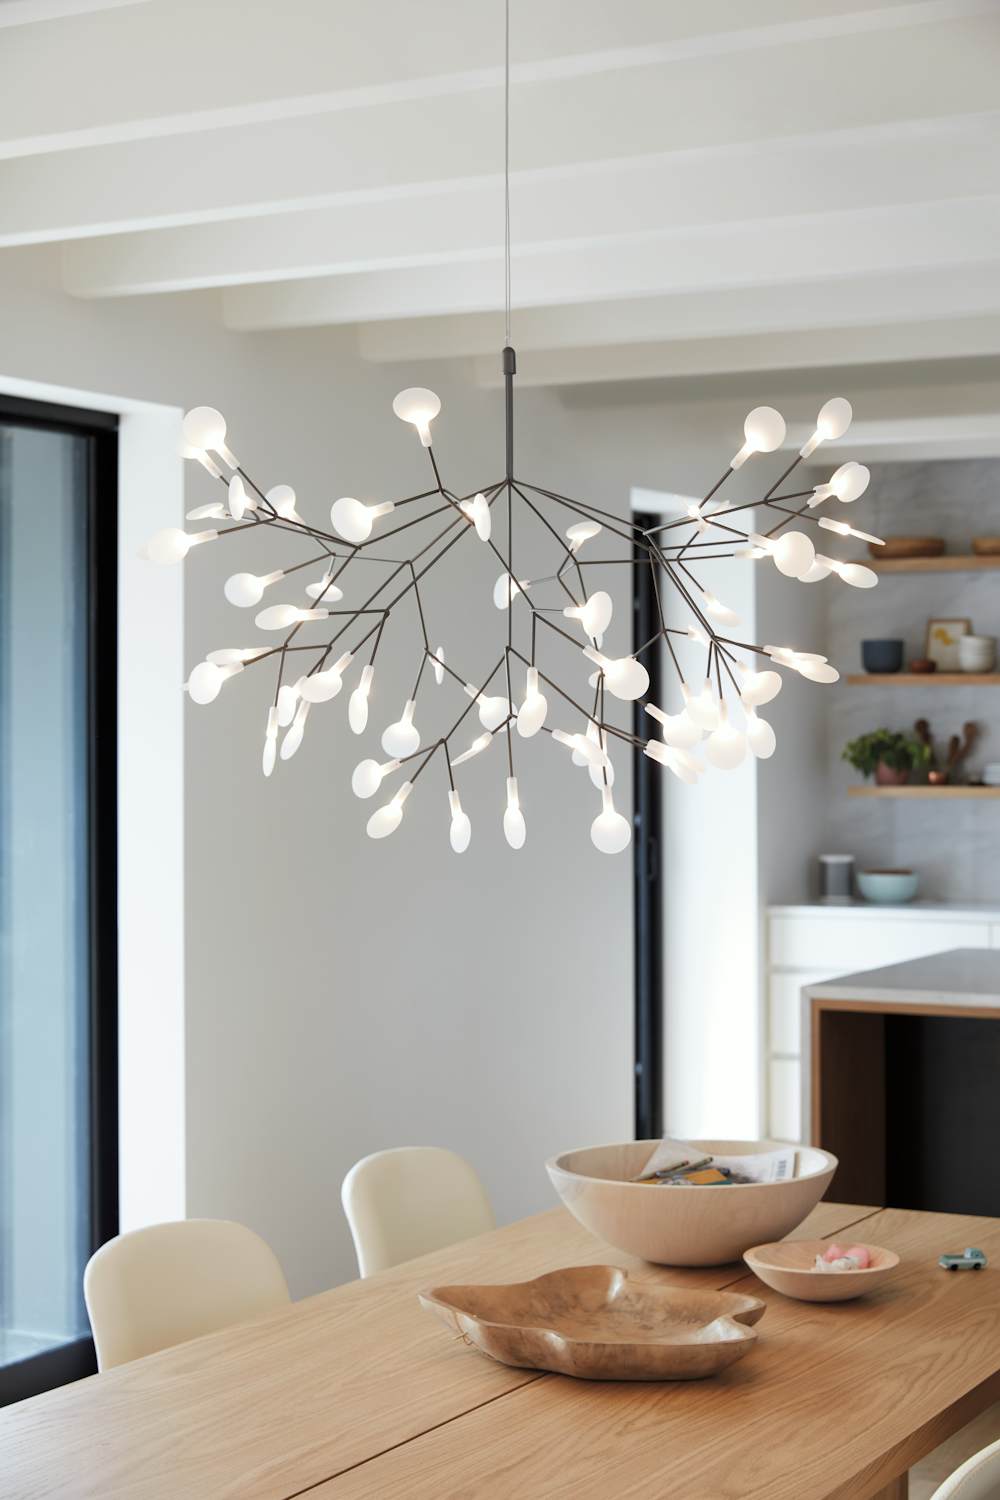 Heracleum II Pendant in a dining room setting